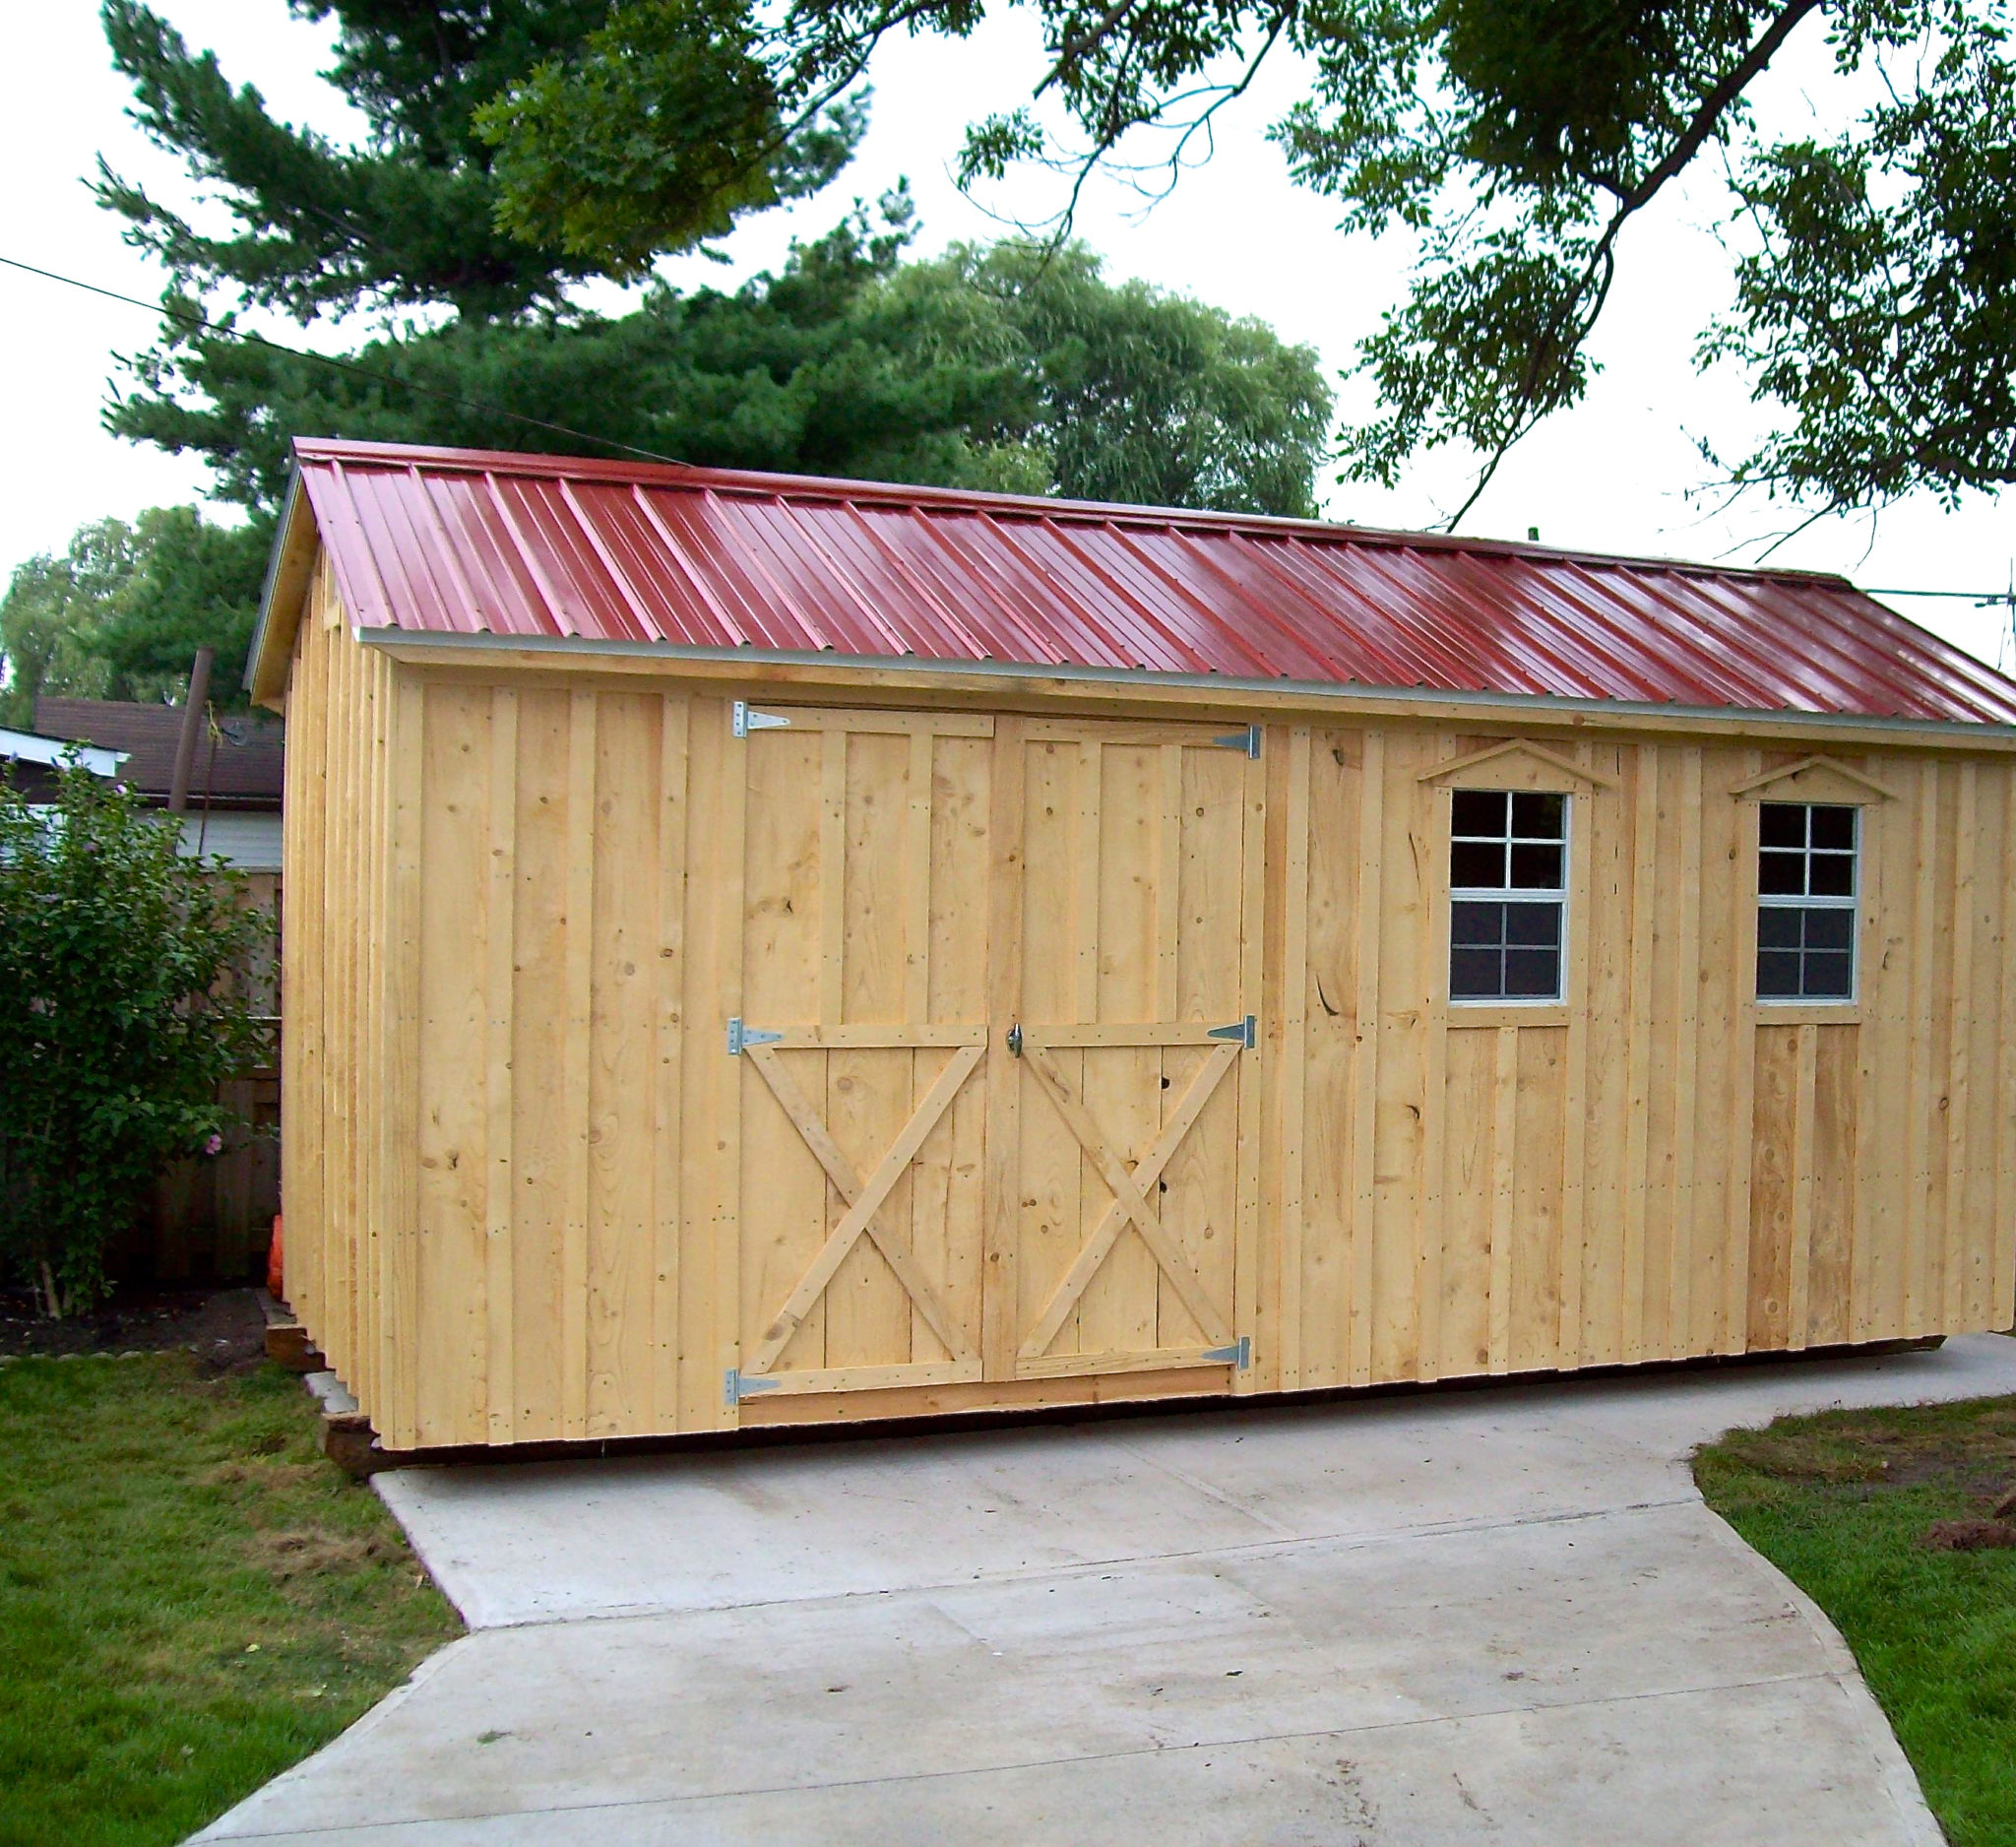 Amish Shed with red roof and double doors